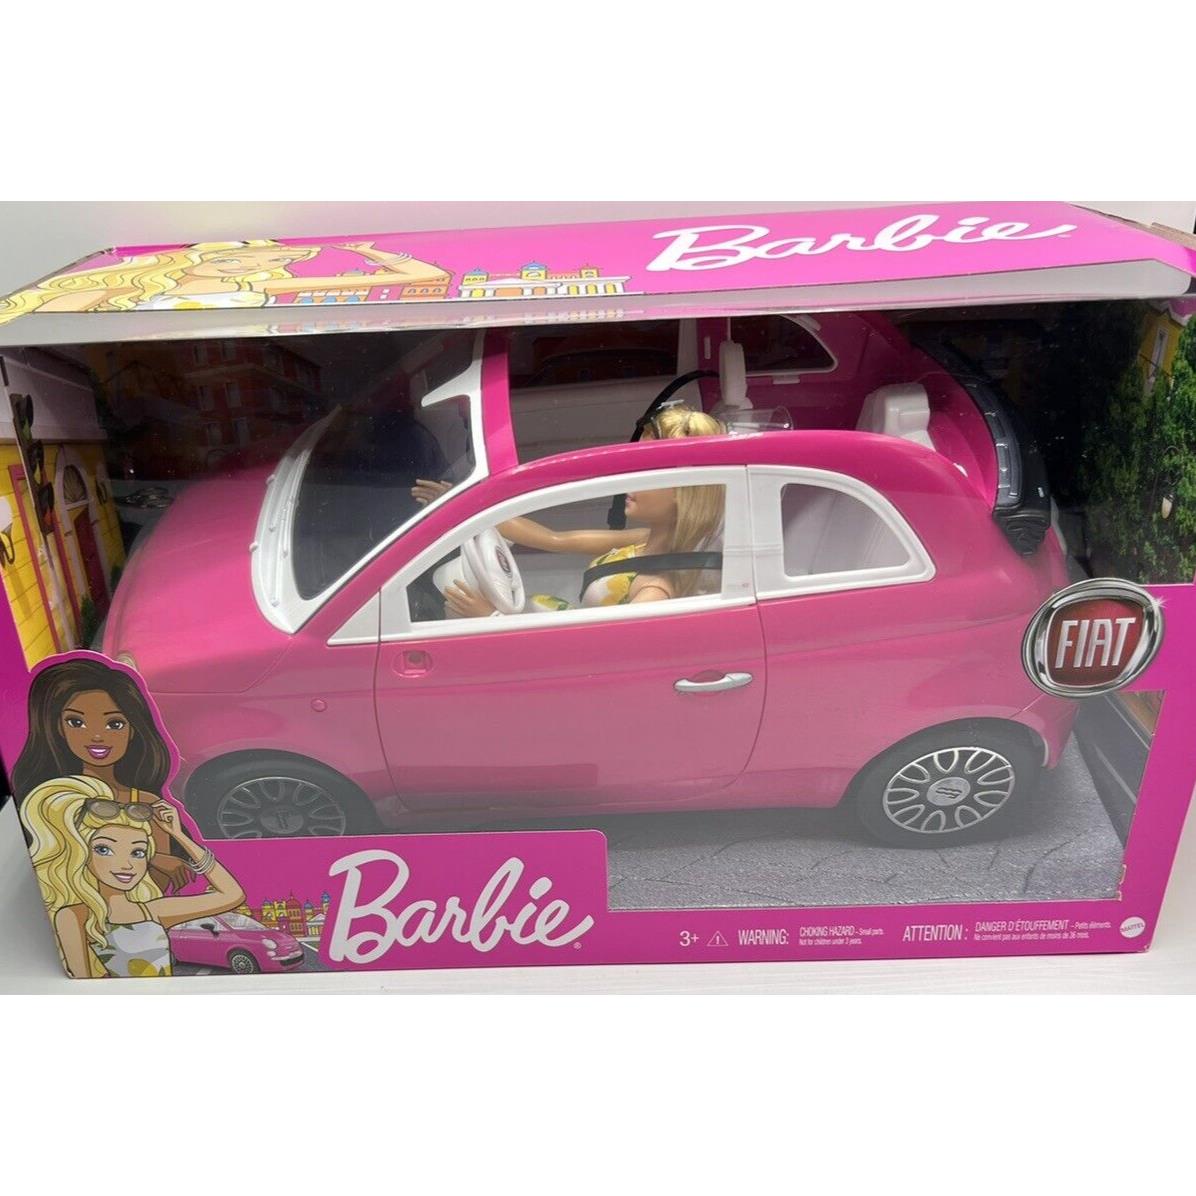 2020 Barbie Fiat 500 Car That Seats 4 Fashion Doll Included Pink Car Age 3+